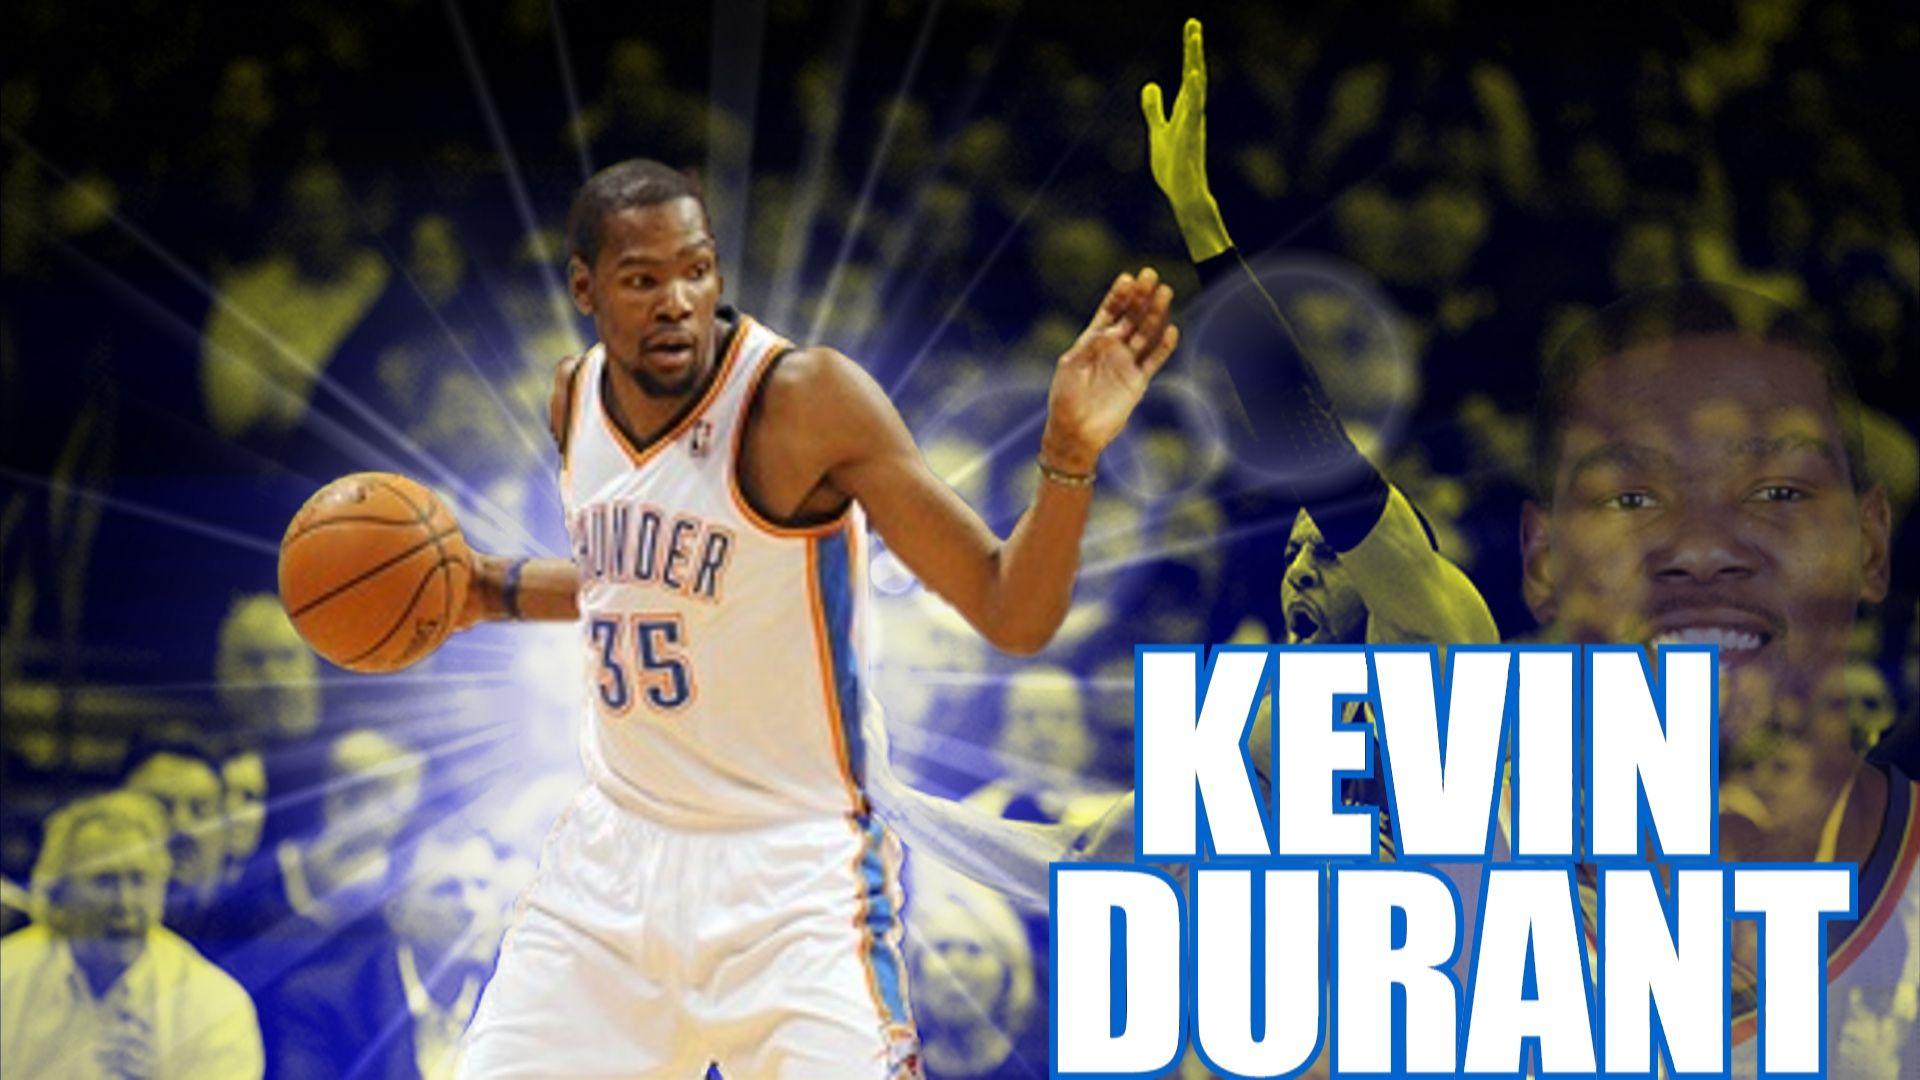 Kevin Durant Wallpaper HD 2016. Wallpaper, Background, Image